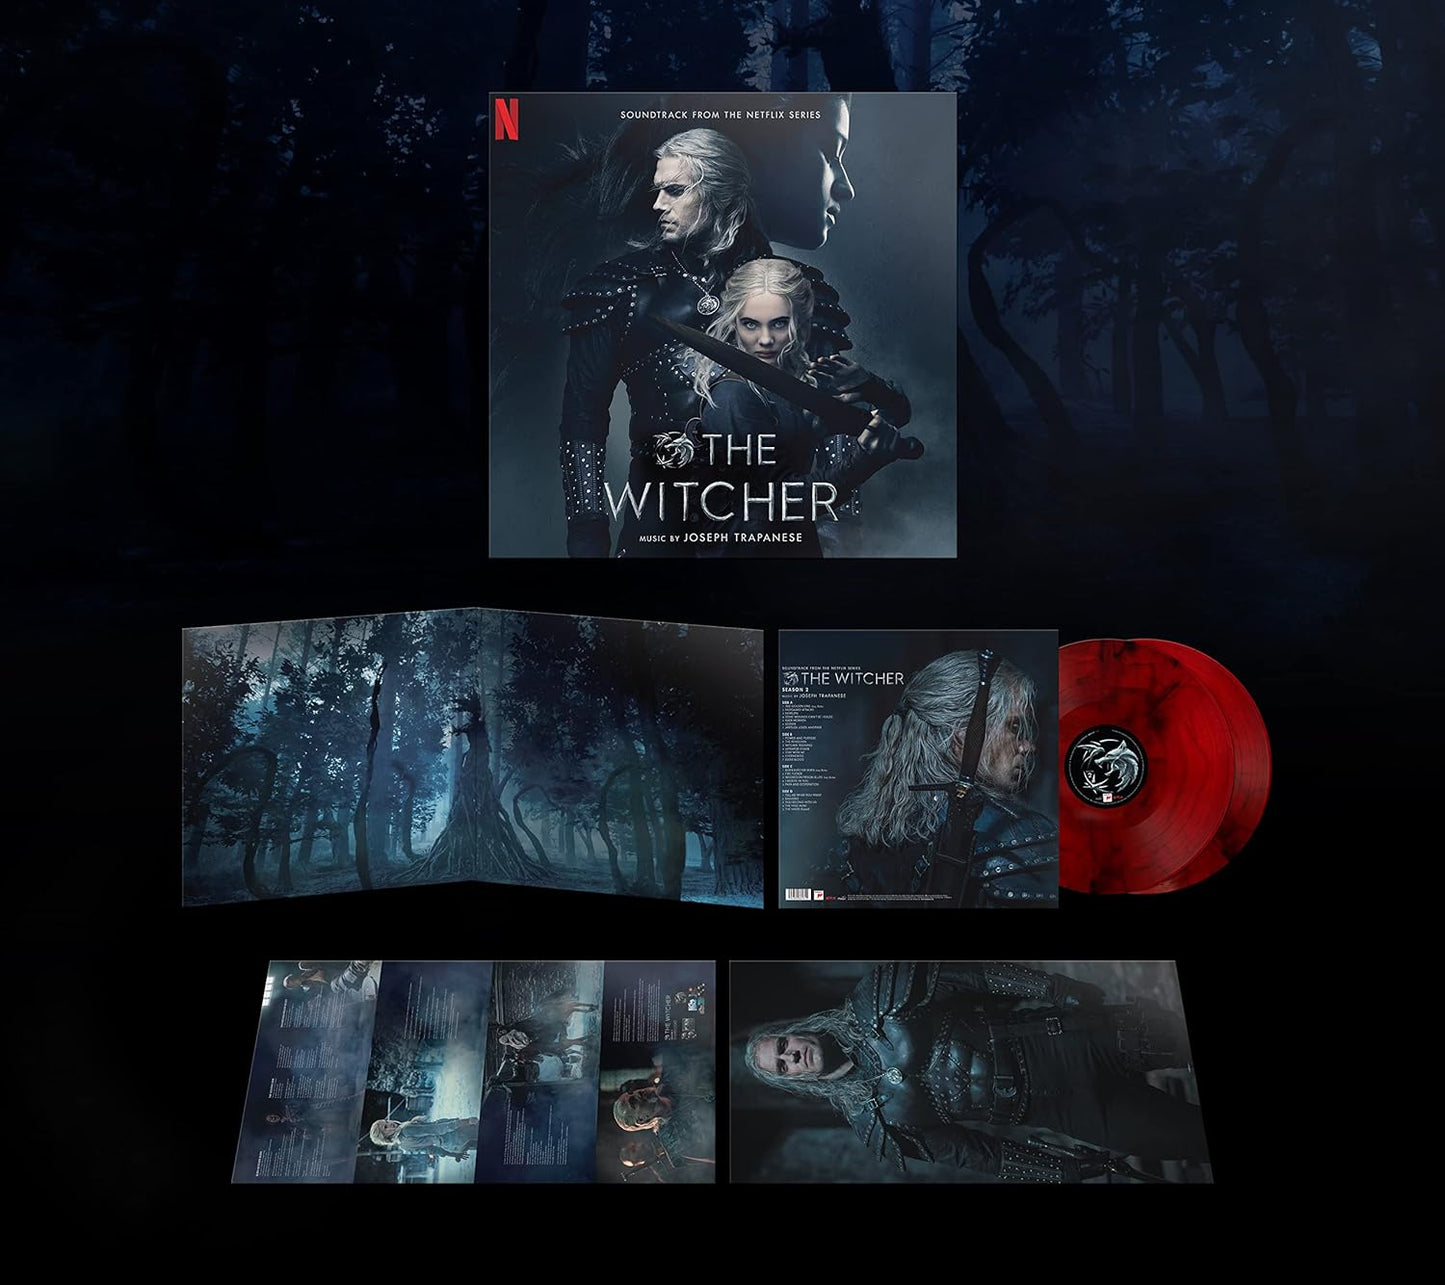 The Witcher: Season 2 (Soundtrack From The Netflix Original Series) (Red Vinyl 2 LP)